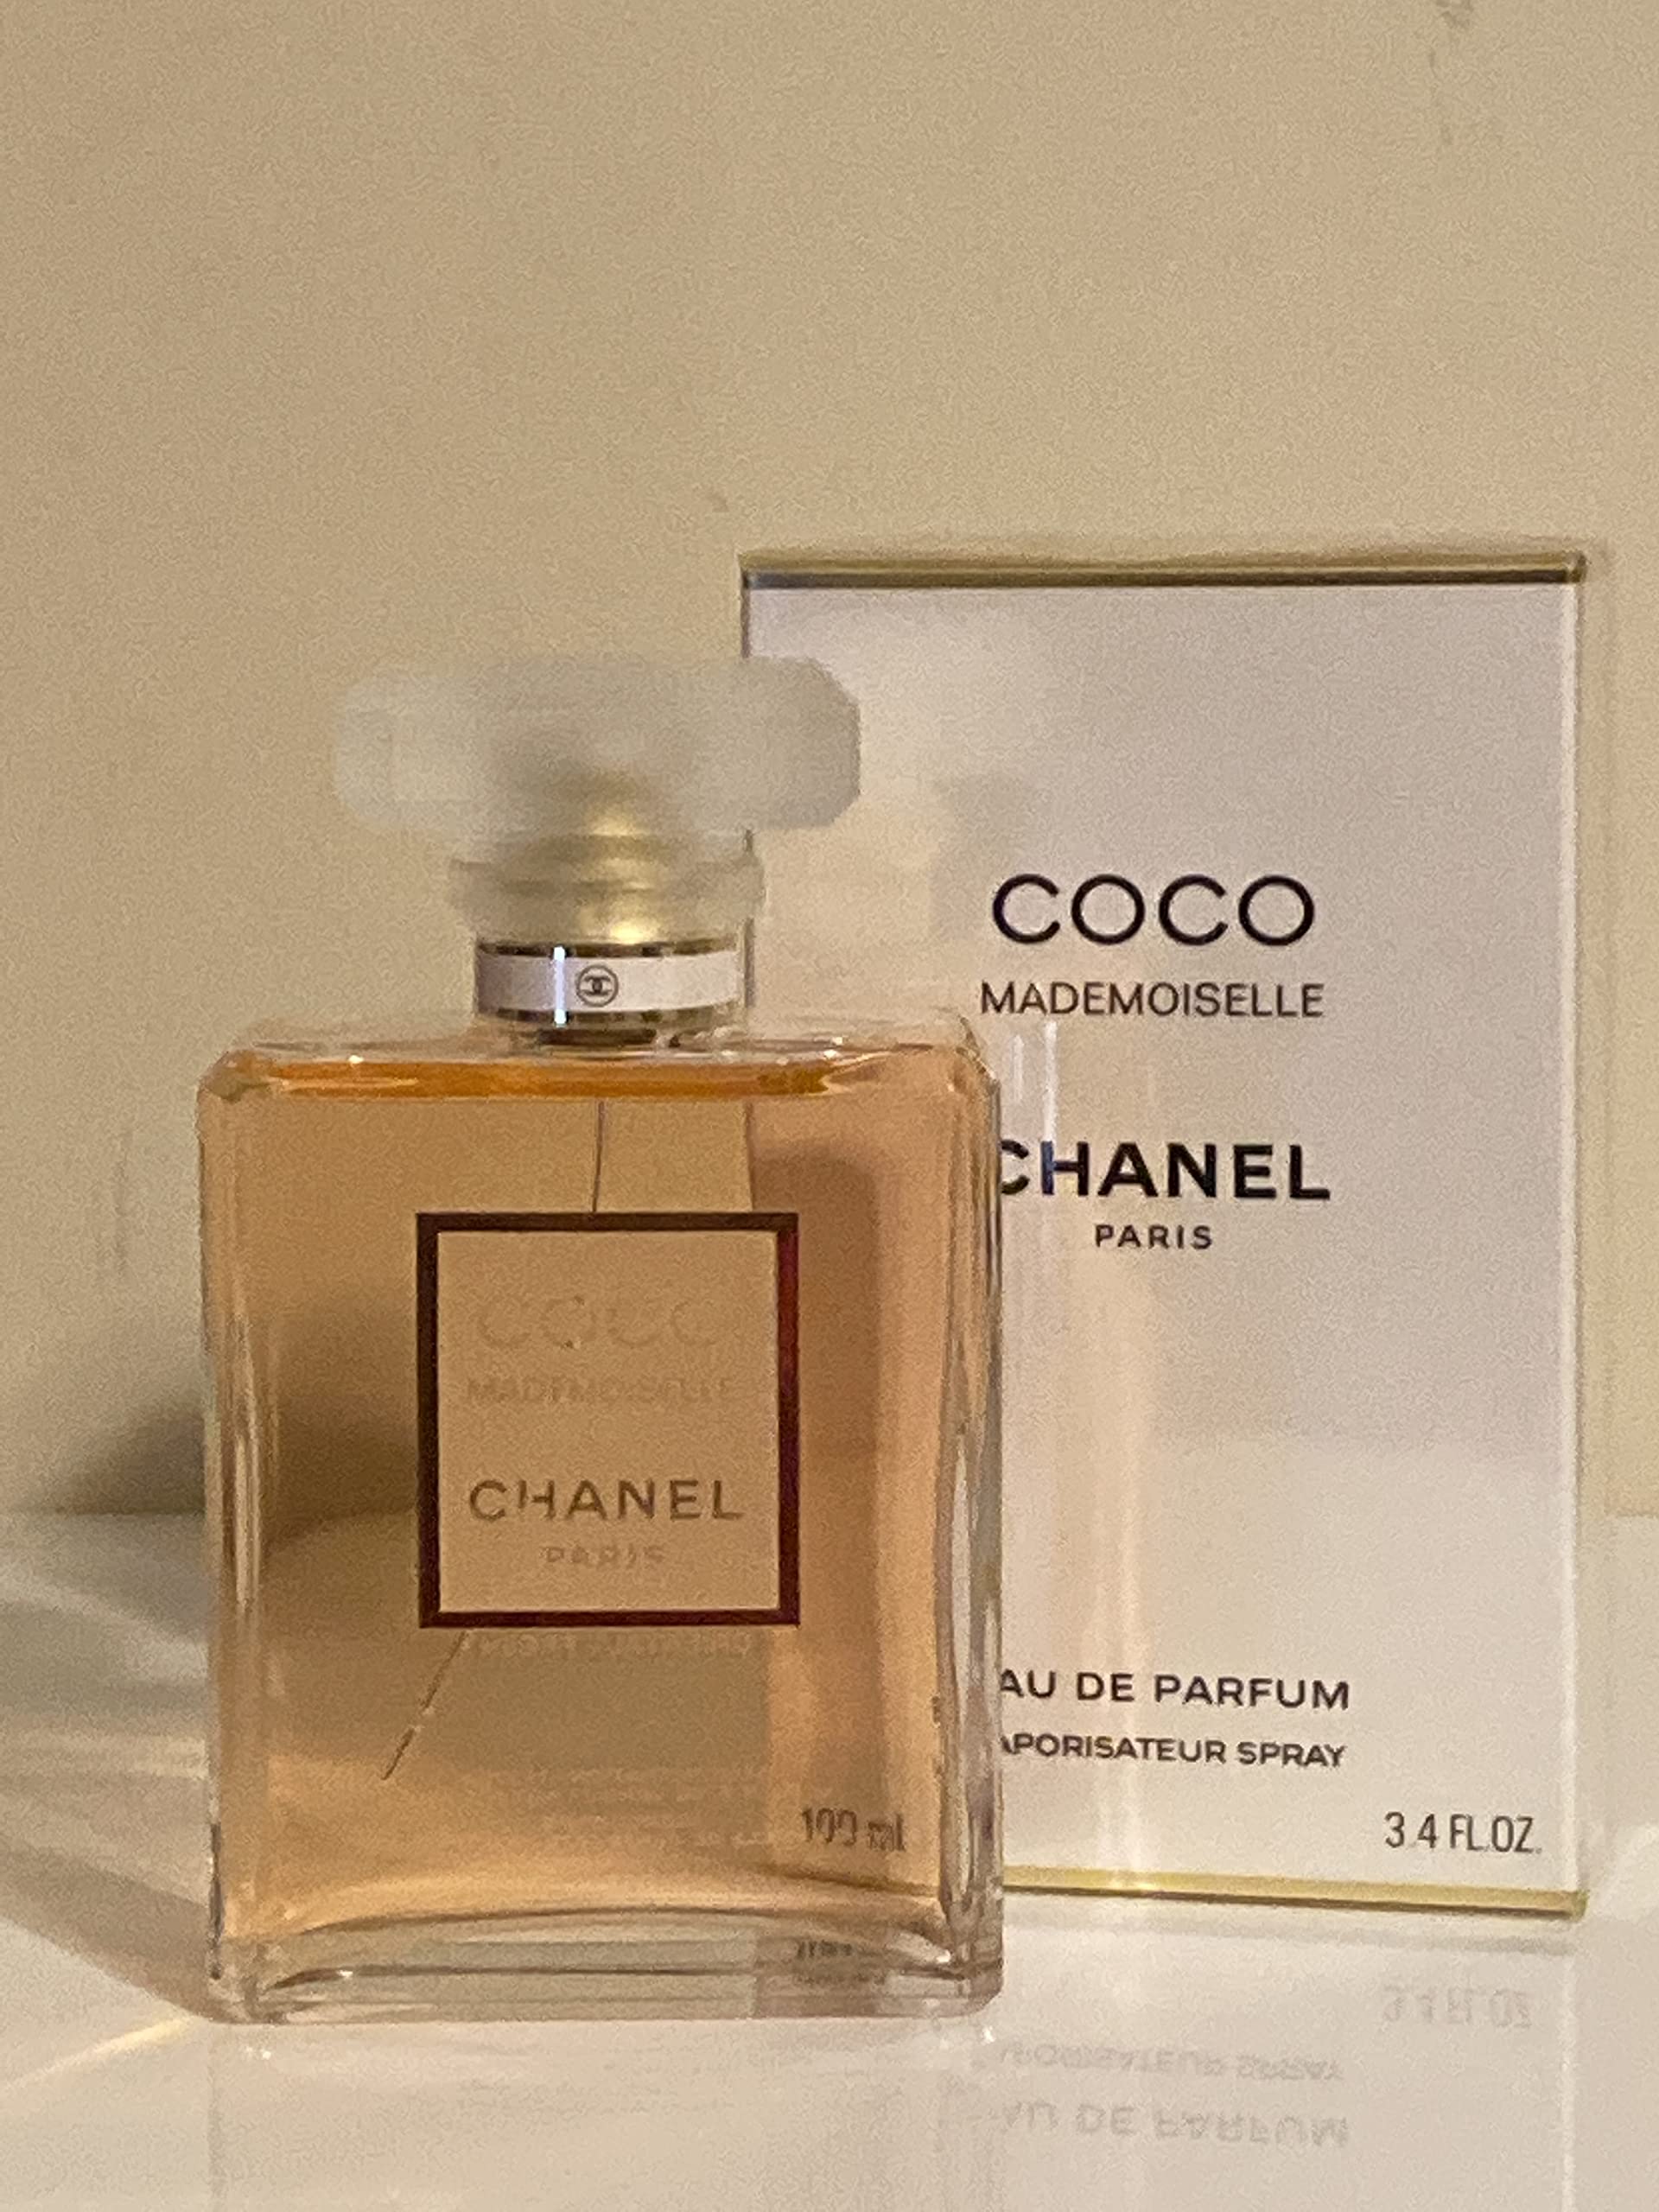 Coco Mademoiselle Perfume by Chanel